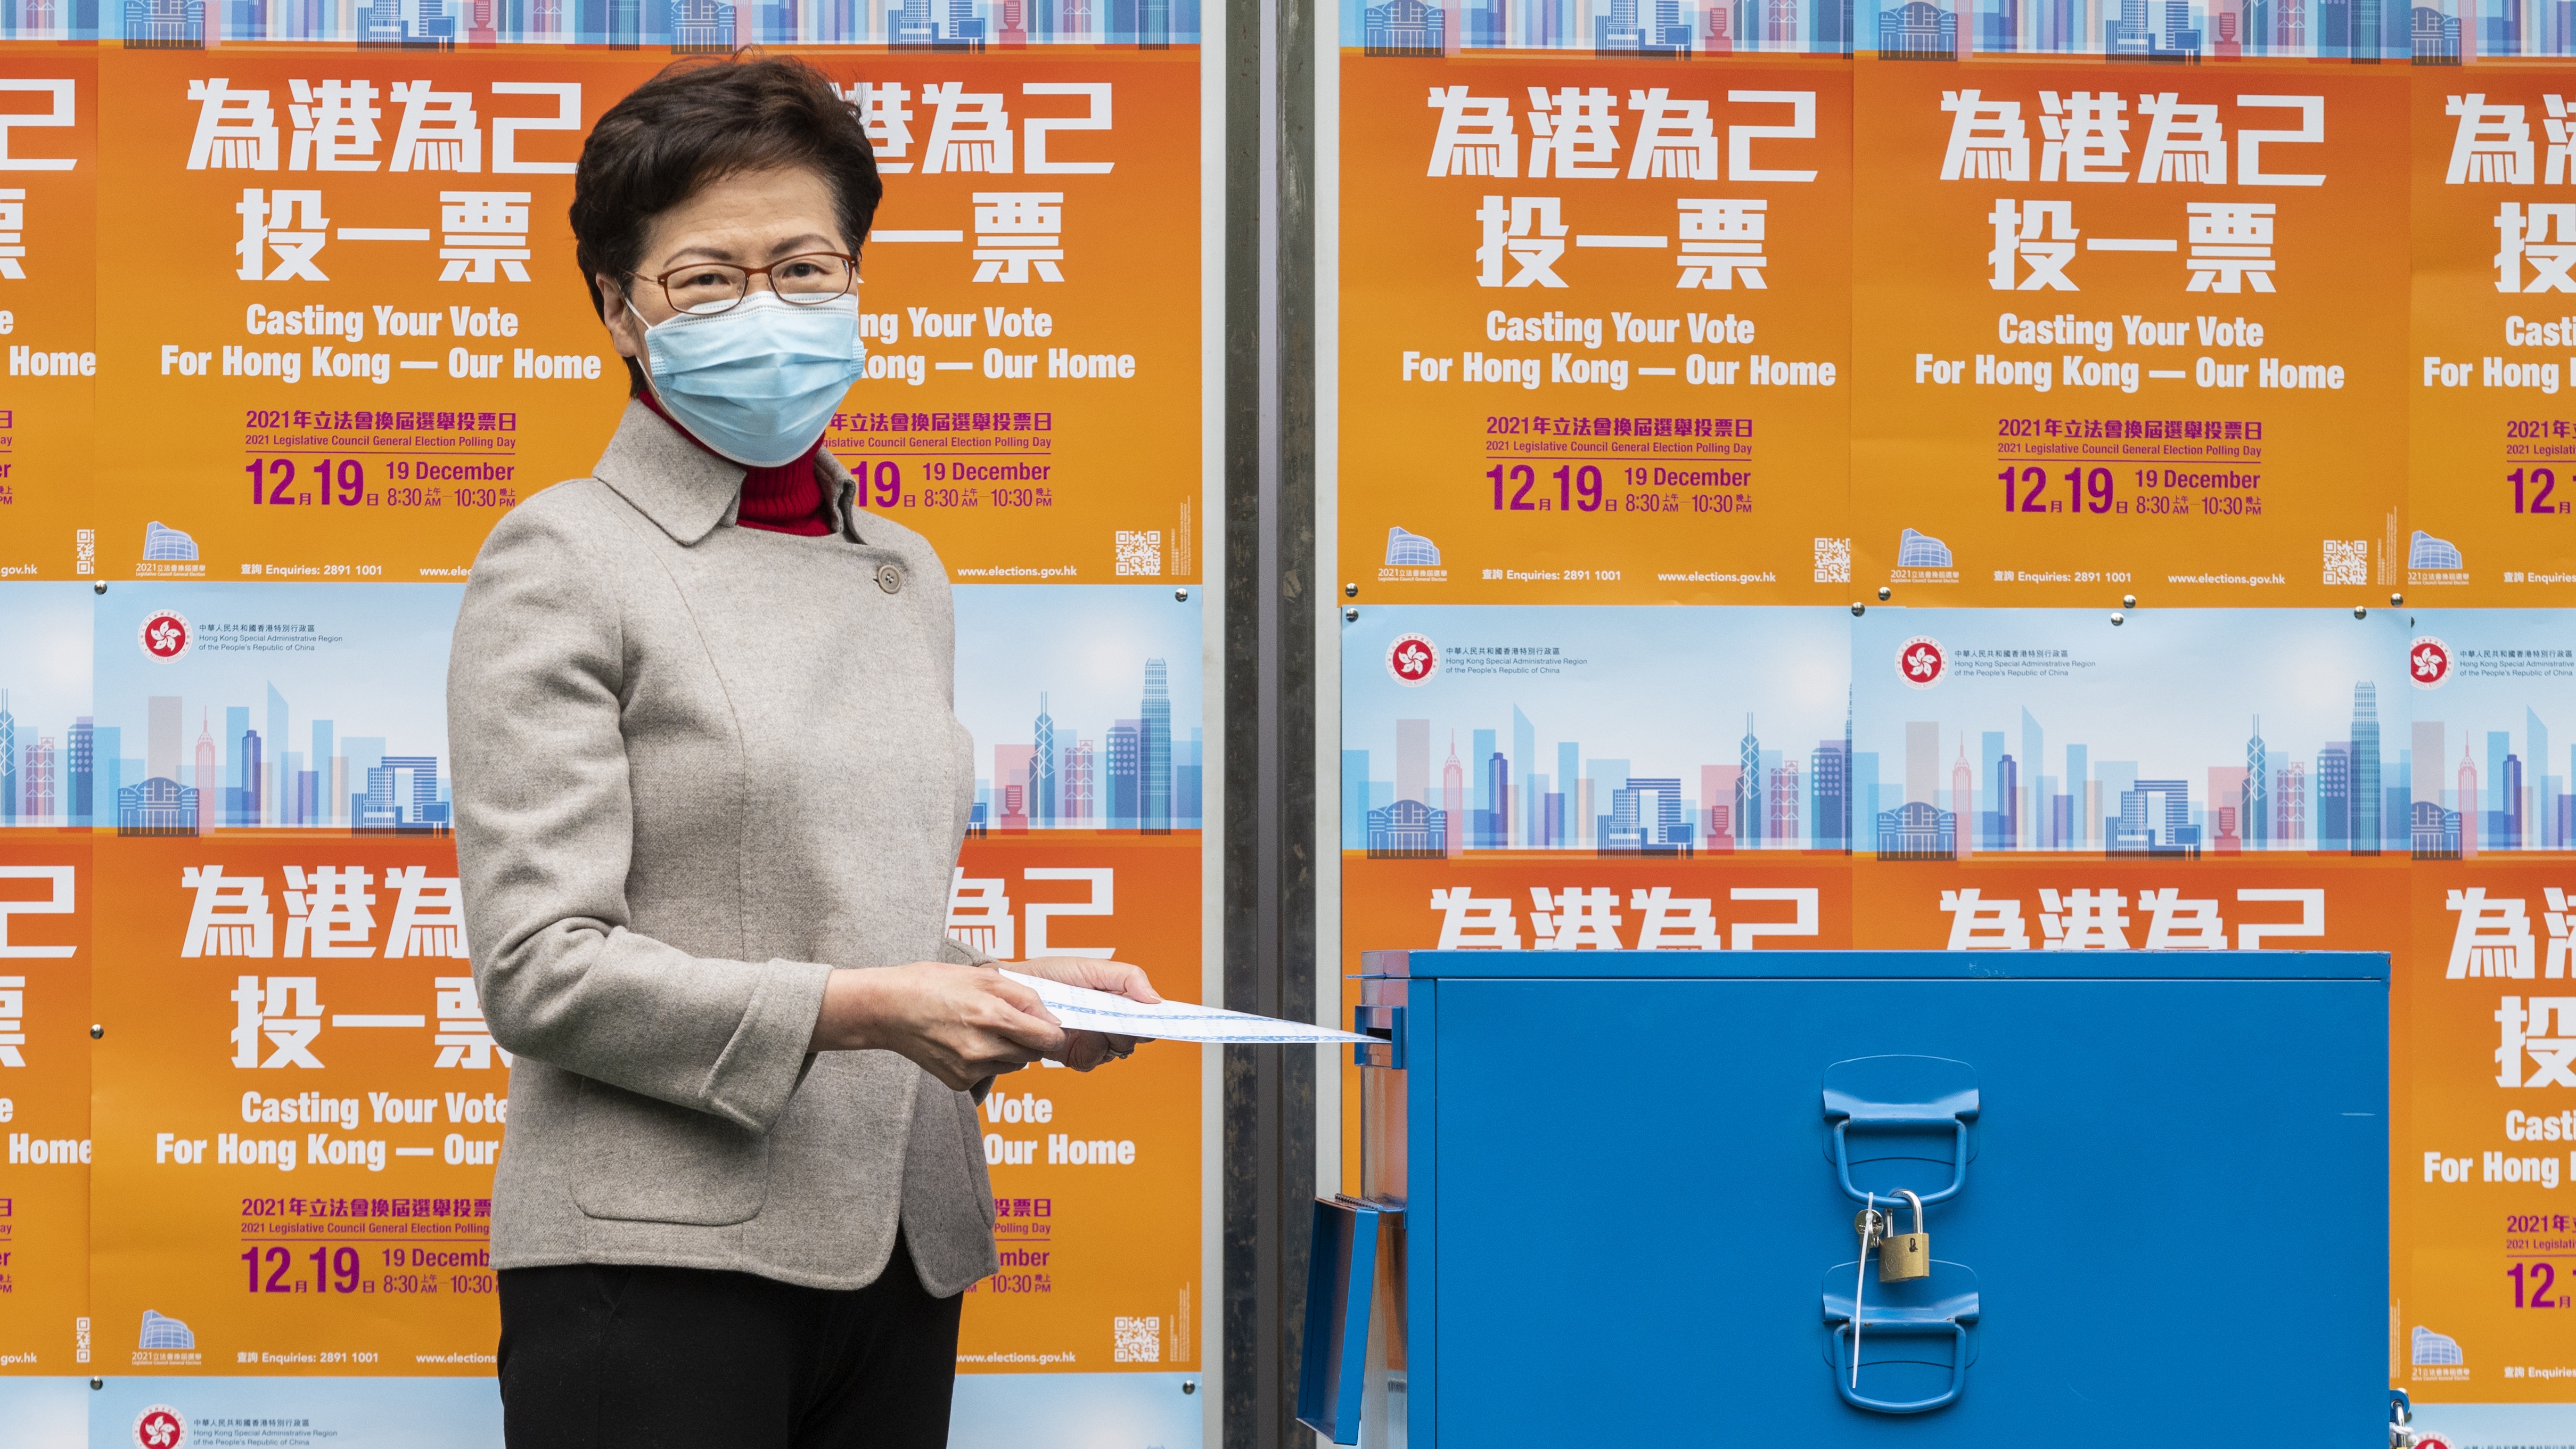 Hong Kong Chief Executive Carrie Lam casts her vote